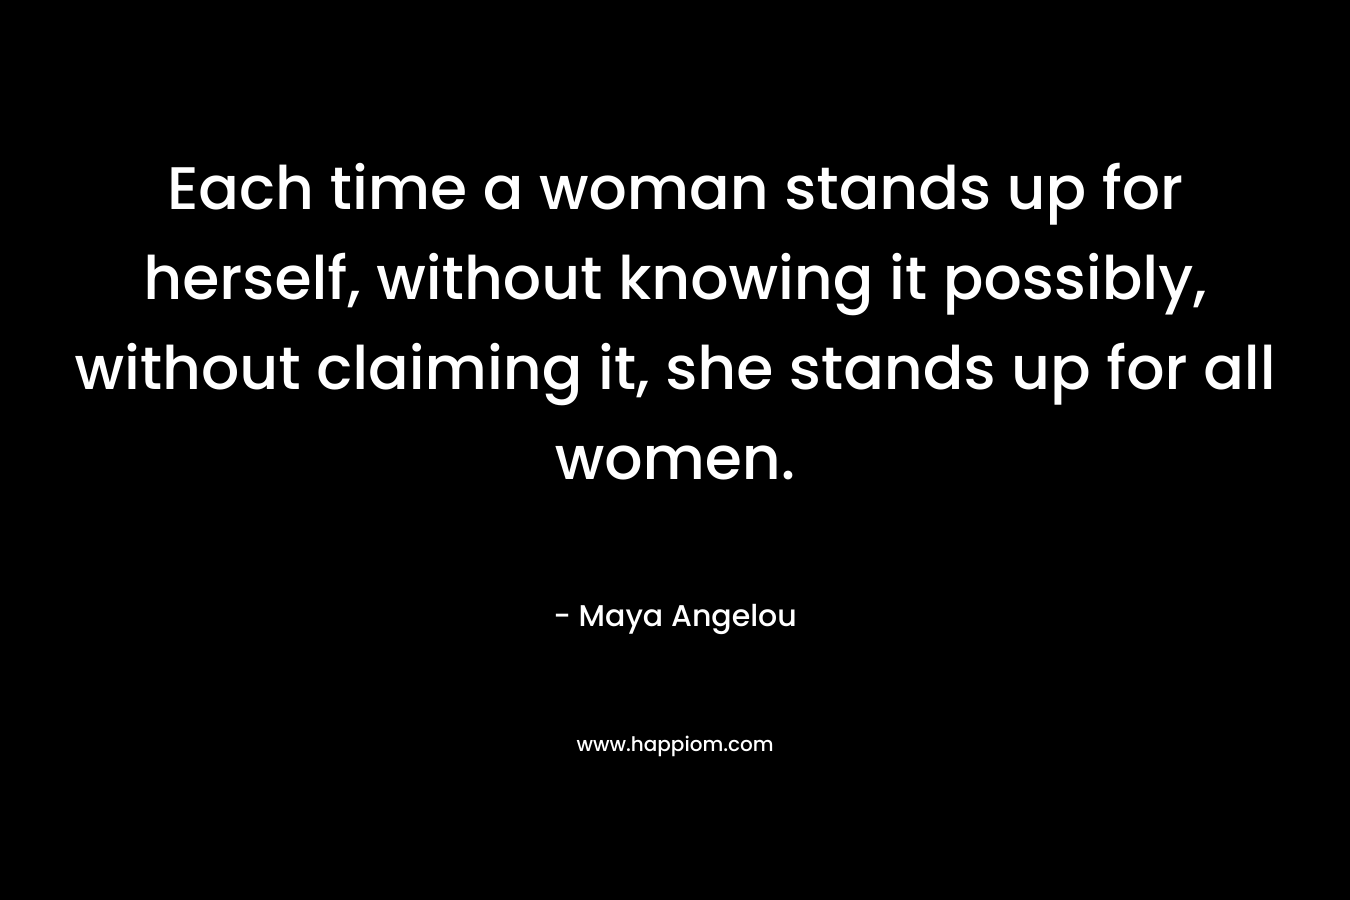 Each time a woman stands up for herself, without knowing it possibly, without claiming it, she stands up for all women. – Maya Angelou